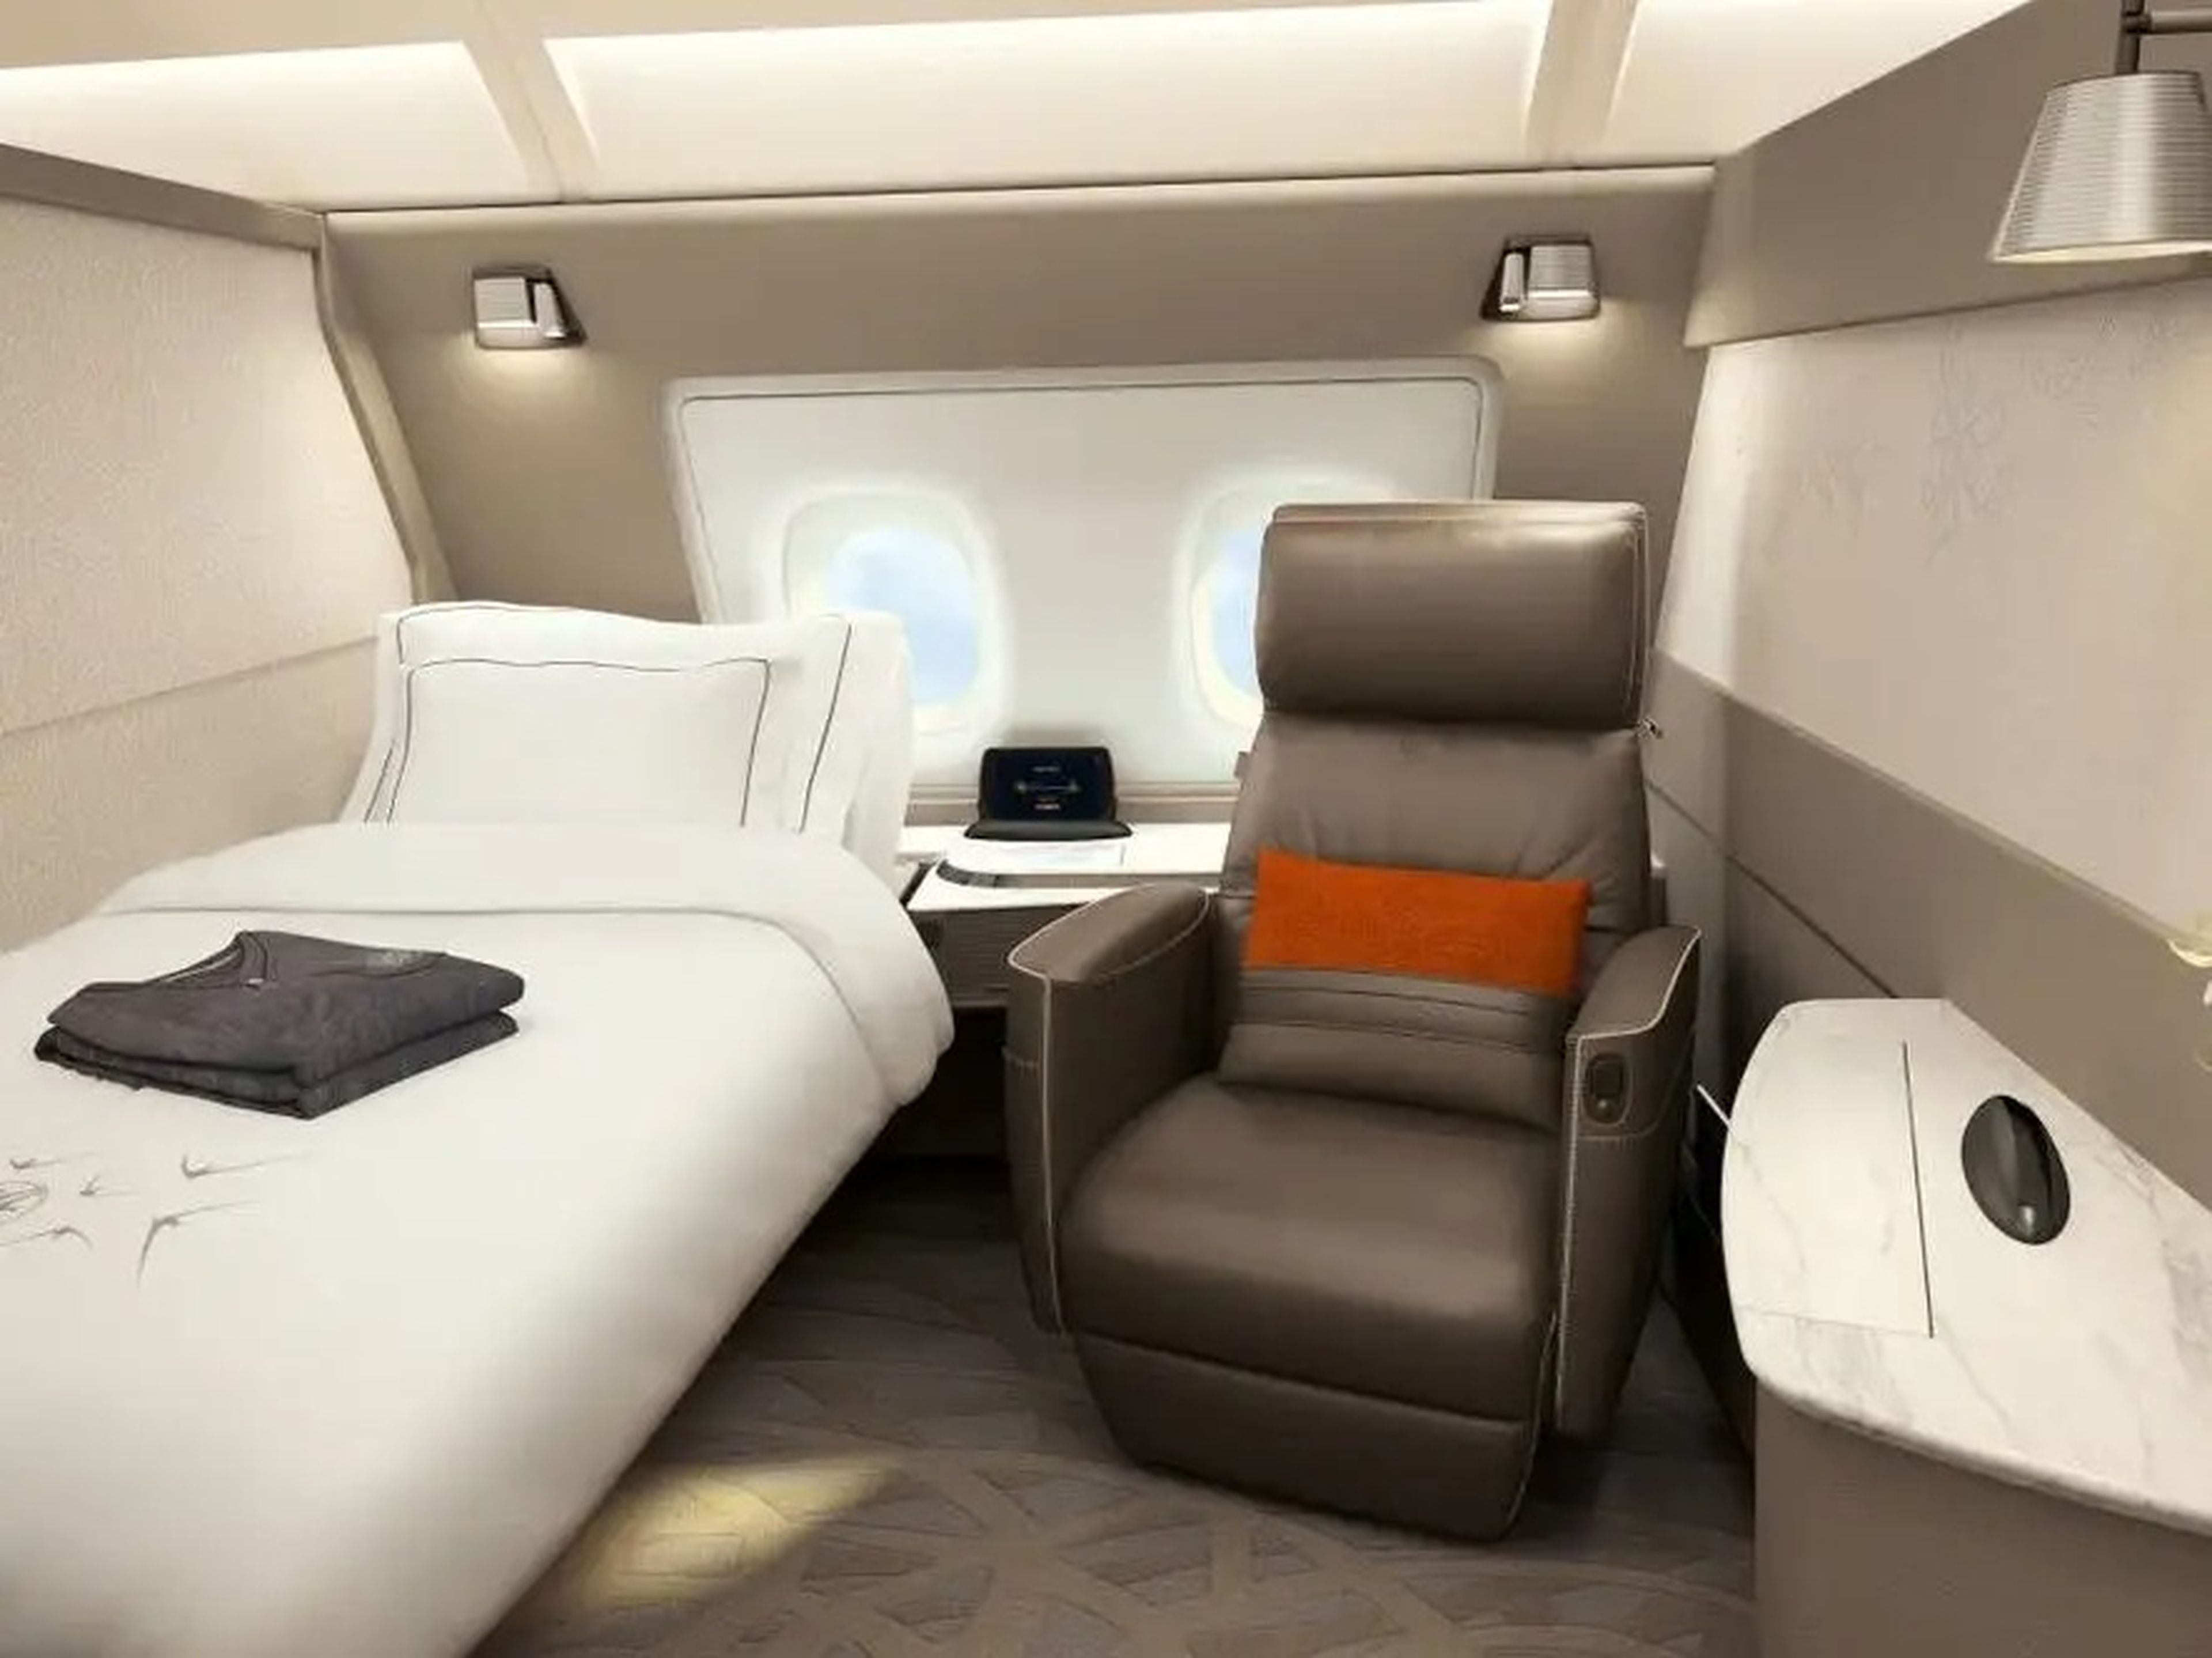 Singapore's first class suite.